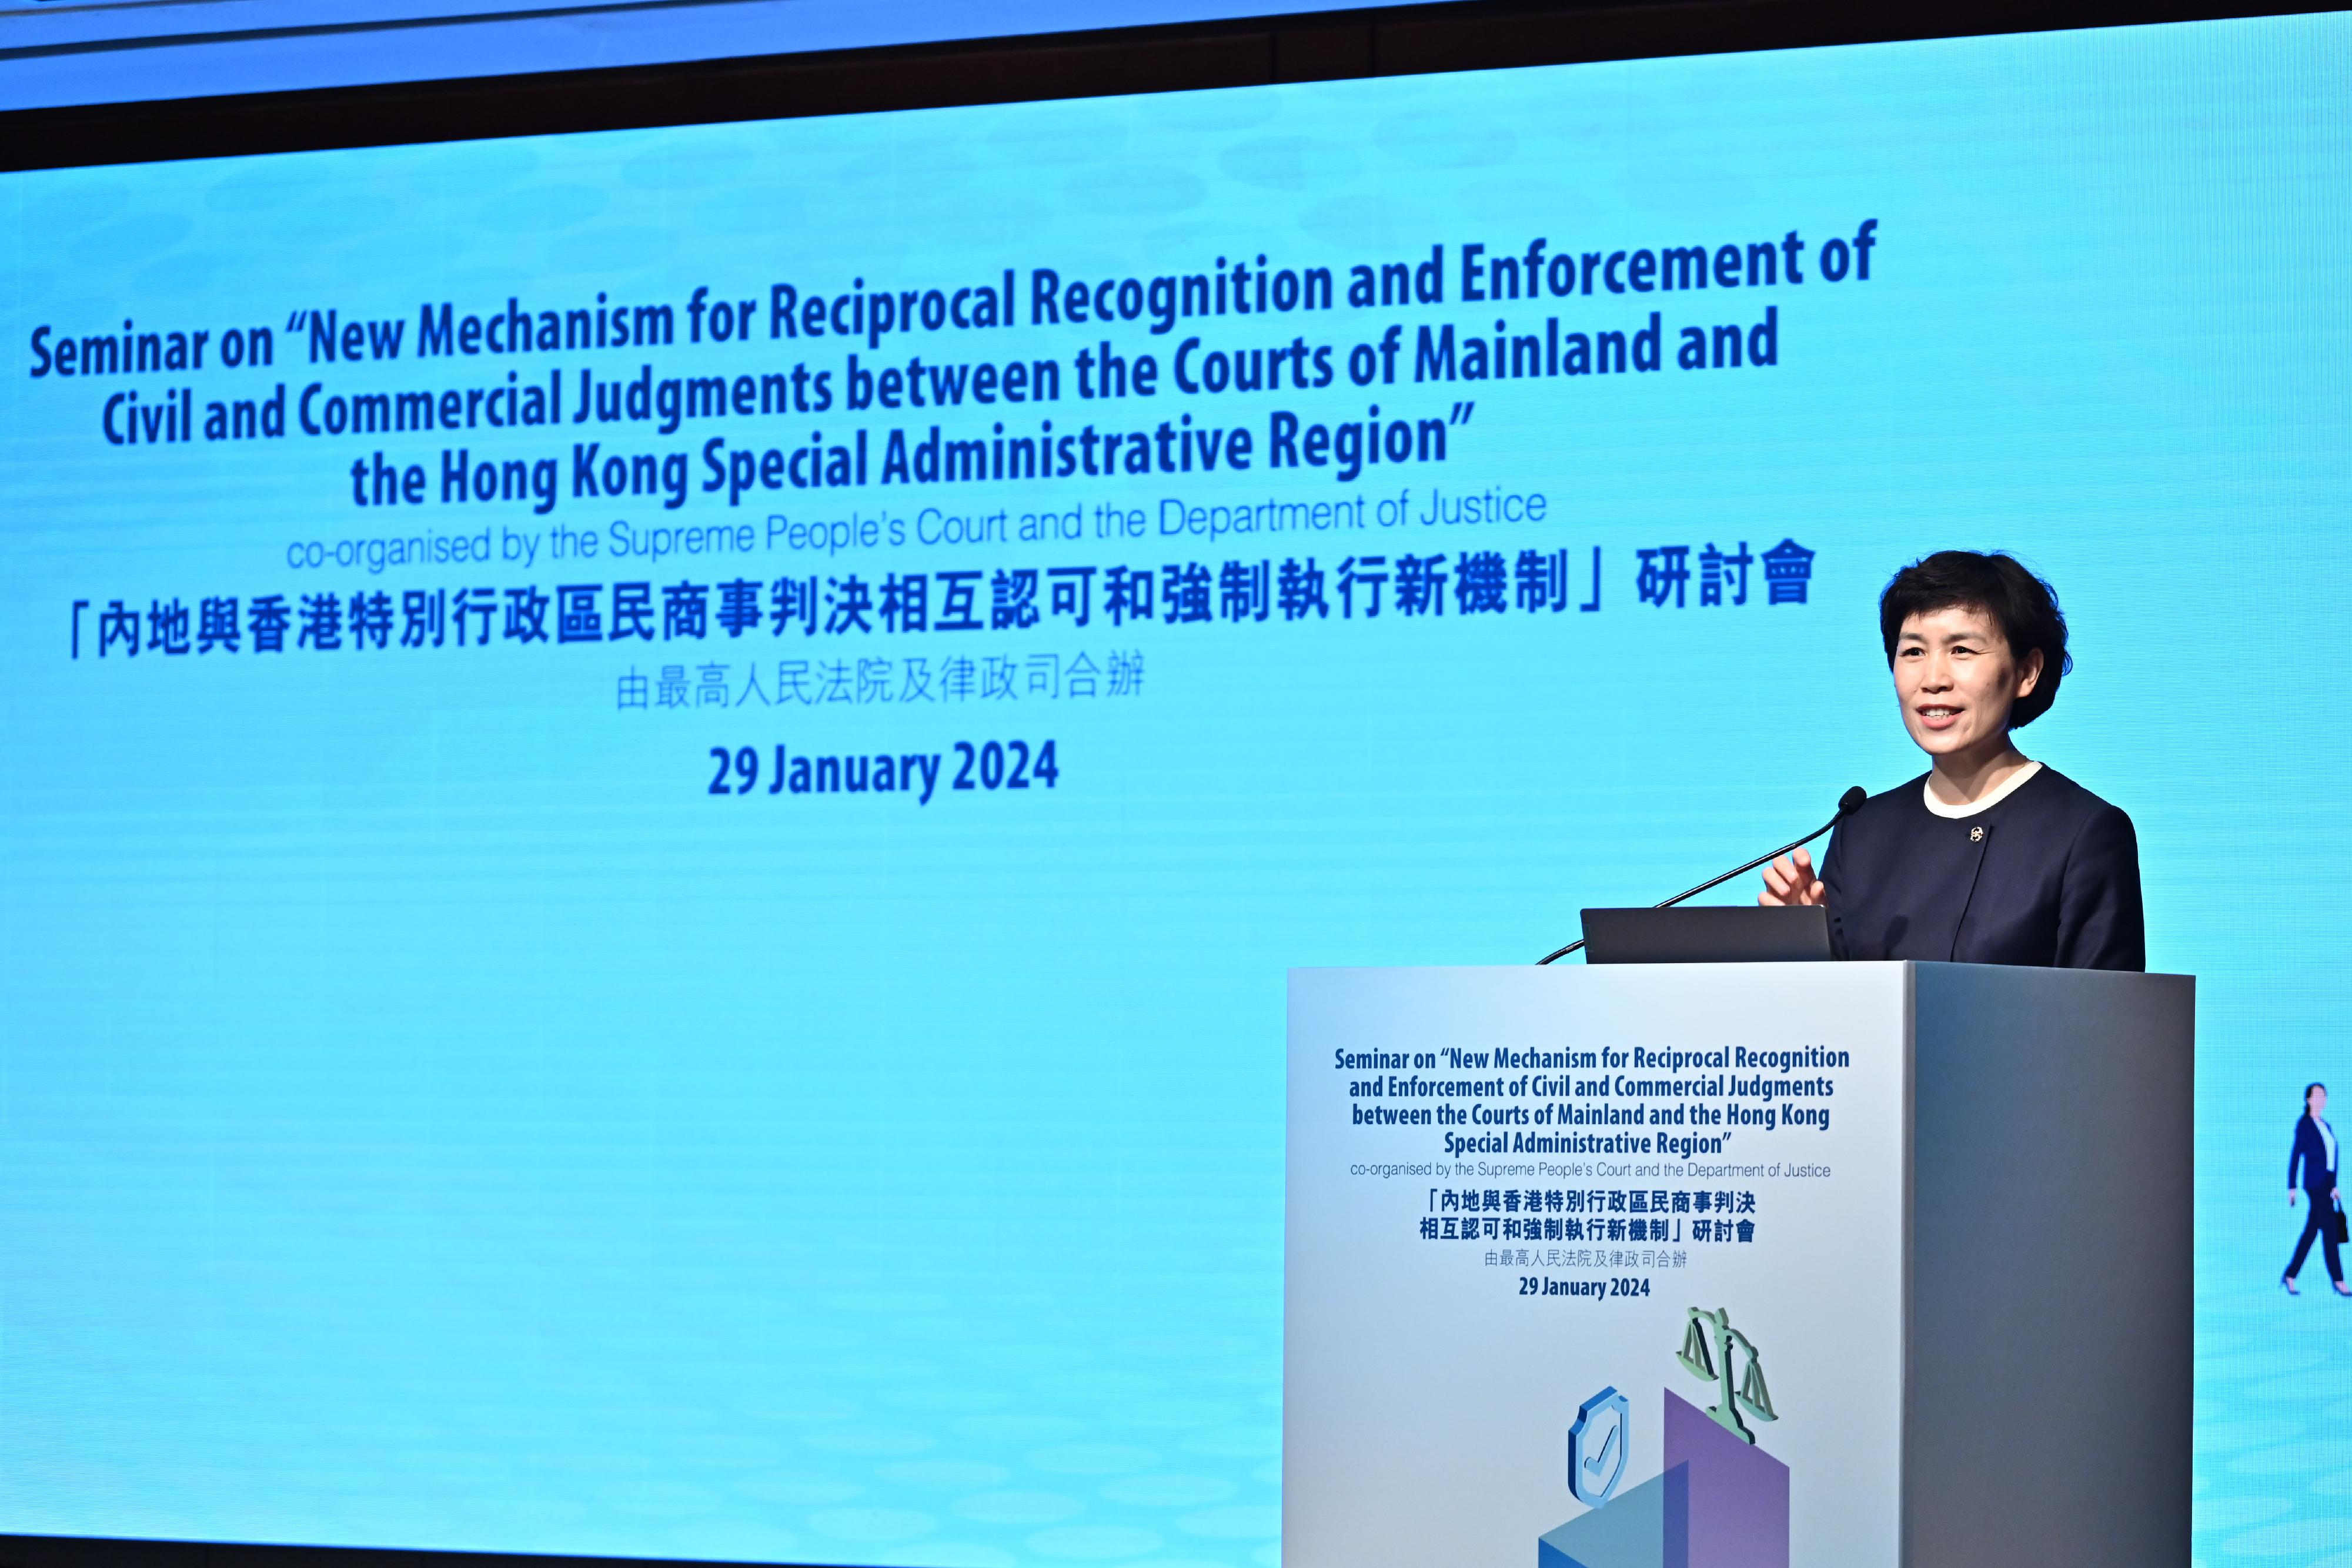 The seminar on "New Mechanism for Reciprocal Recognition and Enforcement of Civil and Commercial Judgments between the Courts of Mainland and the Hong Kong Special Administrative Region" co-organised by the Supreme People's Court (SPC) and the Department of Justice was held today (January 29). Photo shows Deputy Director General of the Research Office of the SPC Ms Si Yanli delivering her keynote speech at the seminar.